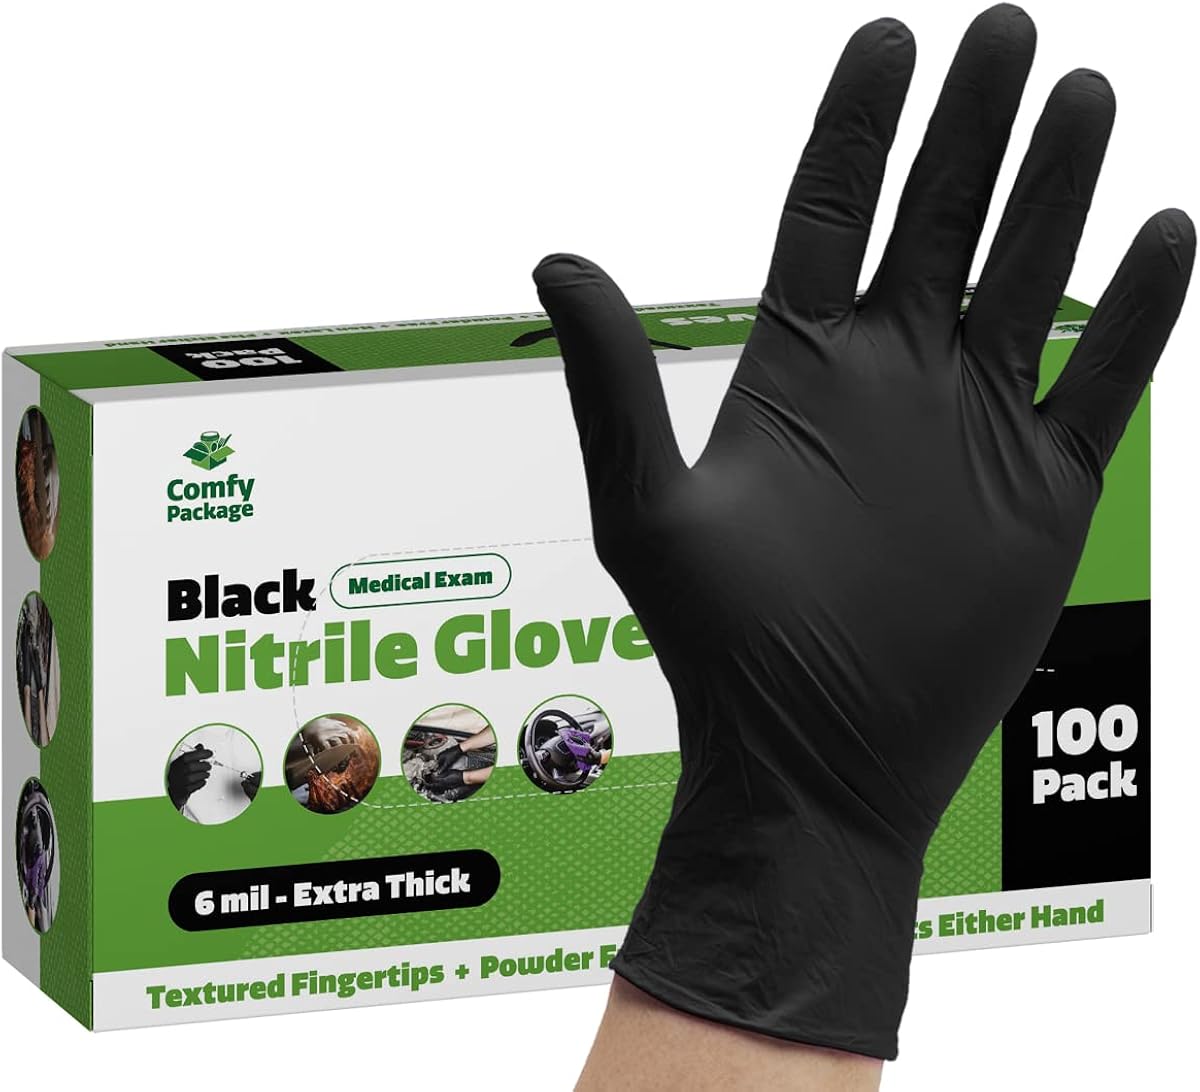 Disposable Black Nitrile Gloves 6 Mil. Extra Strength Latex & Powder Free, Textured Fingertips Gloves